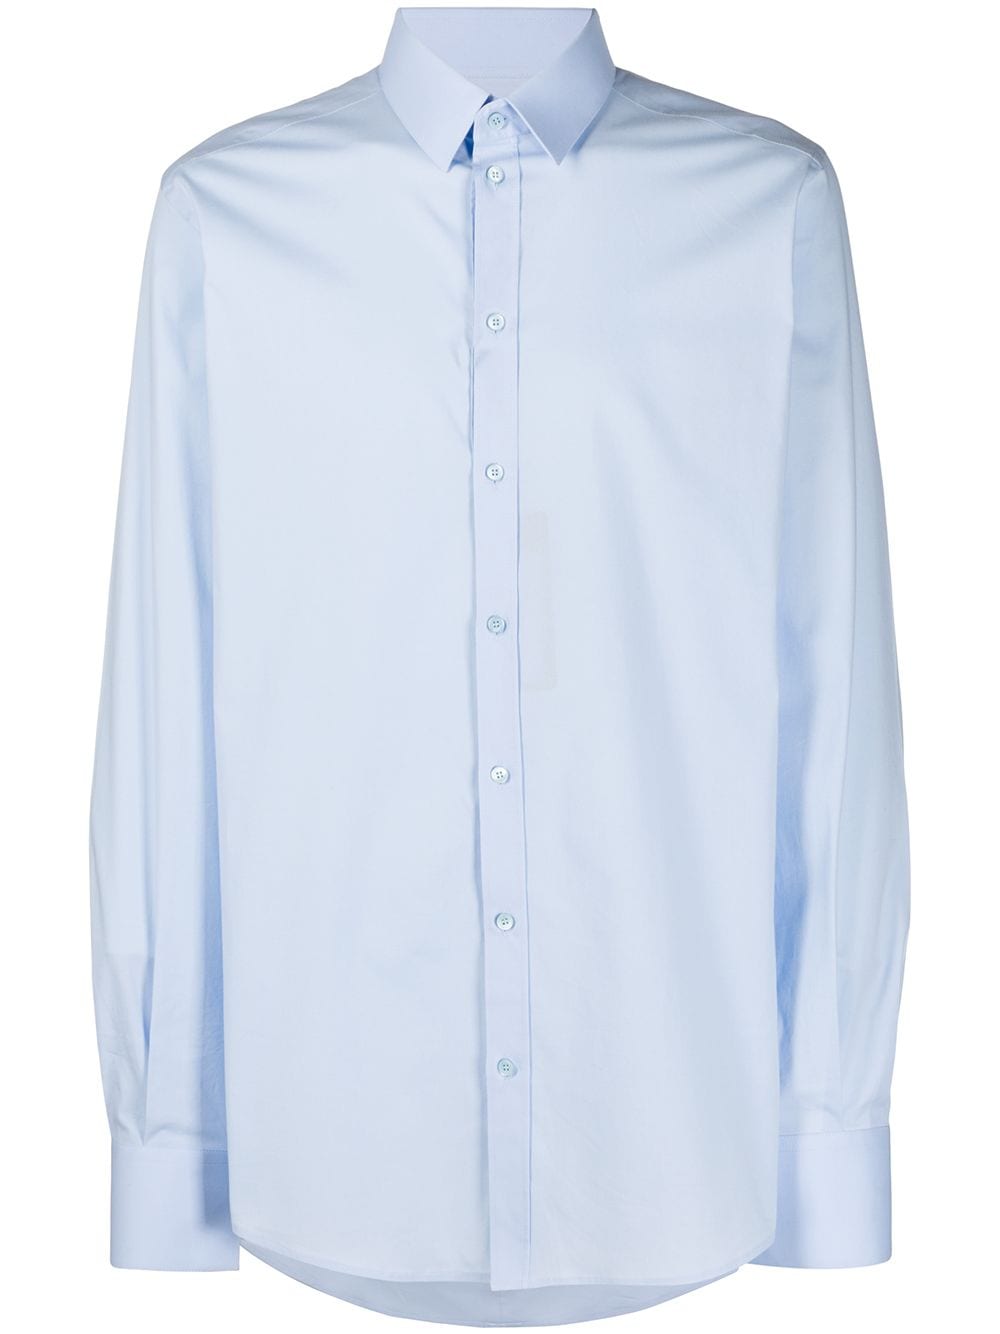 Shop Dolce & Gabbana classic formal shirt with Express Delivery - FARFETCH